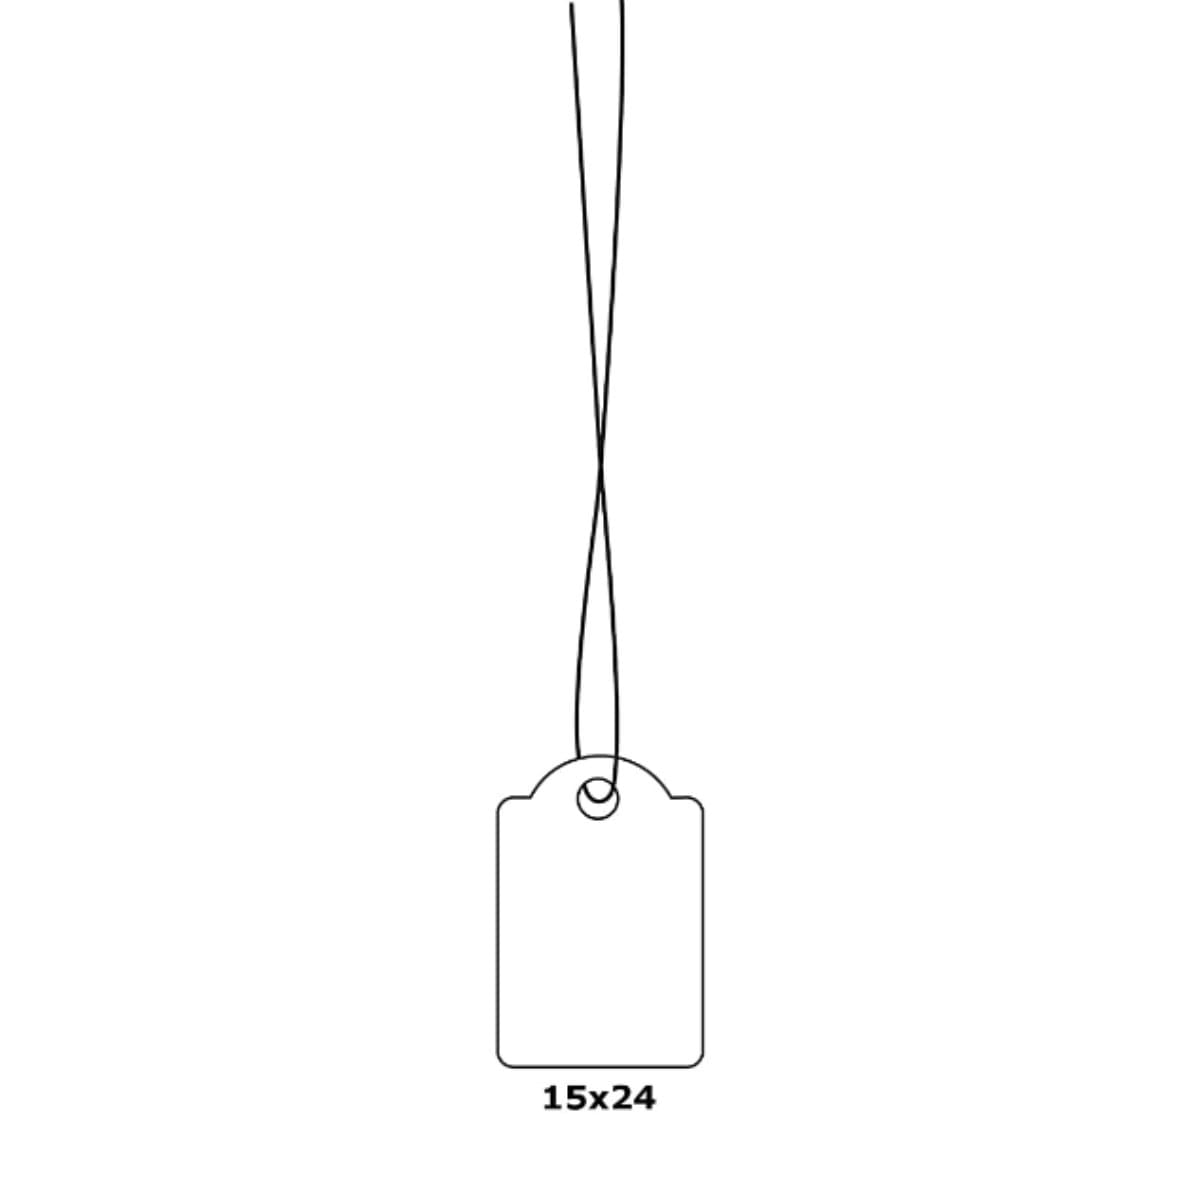 Herma Merchandise Tags with String, 15 x 24 mm, White